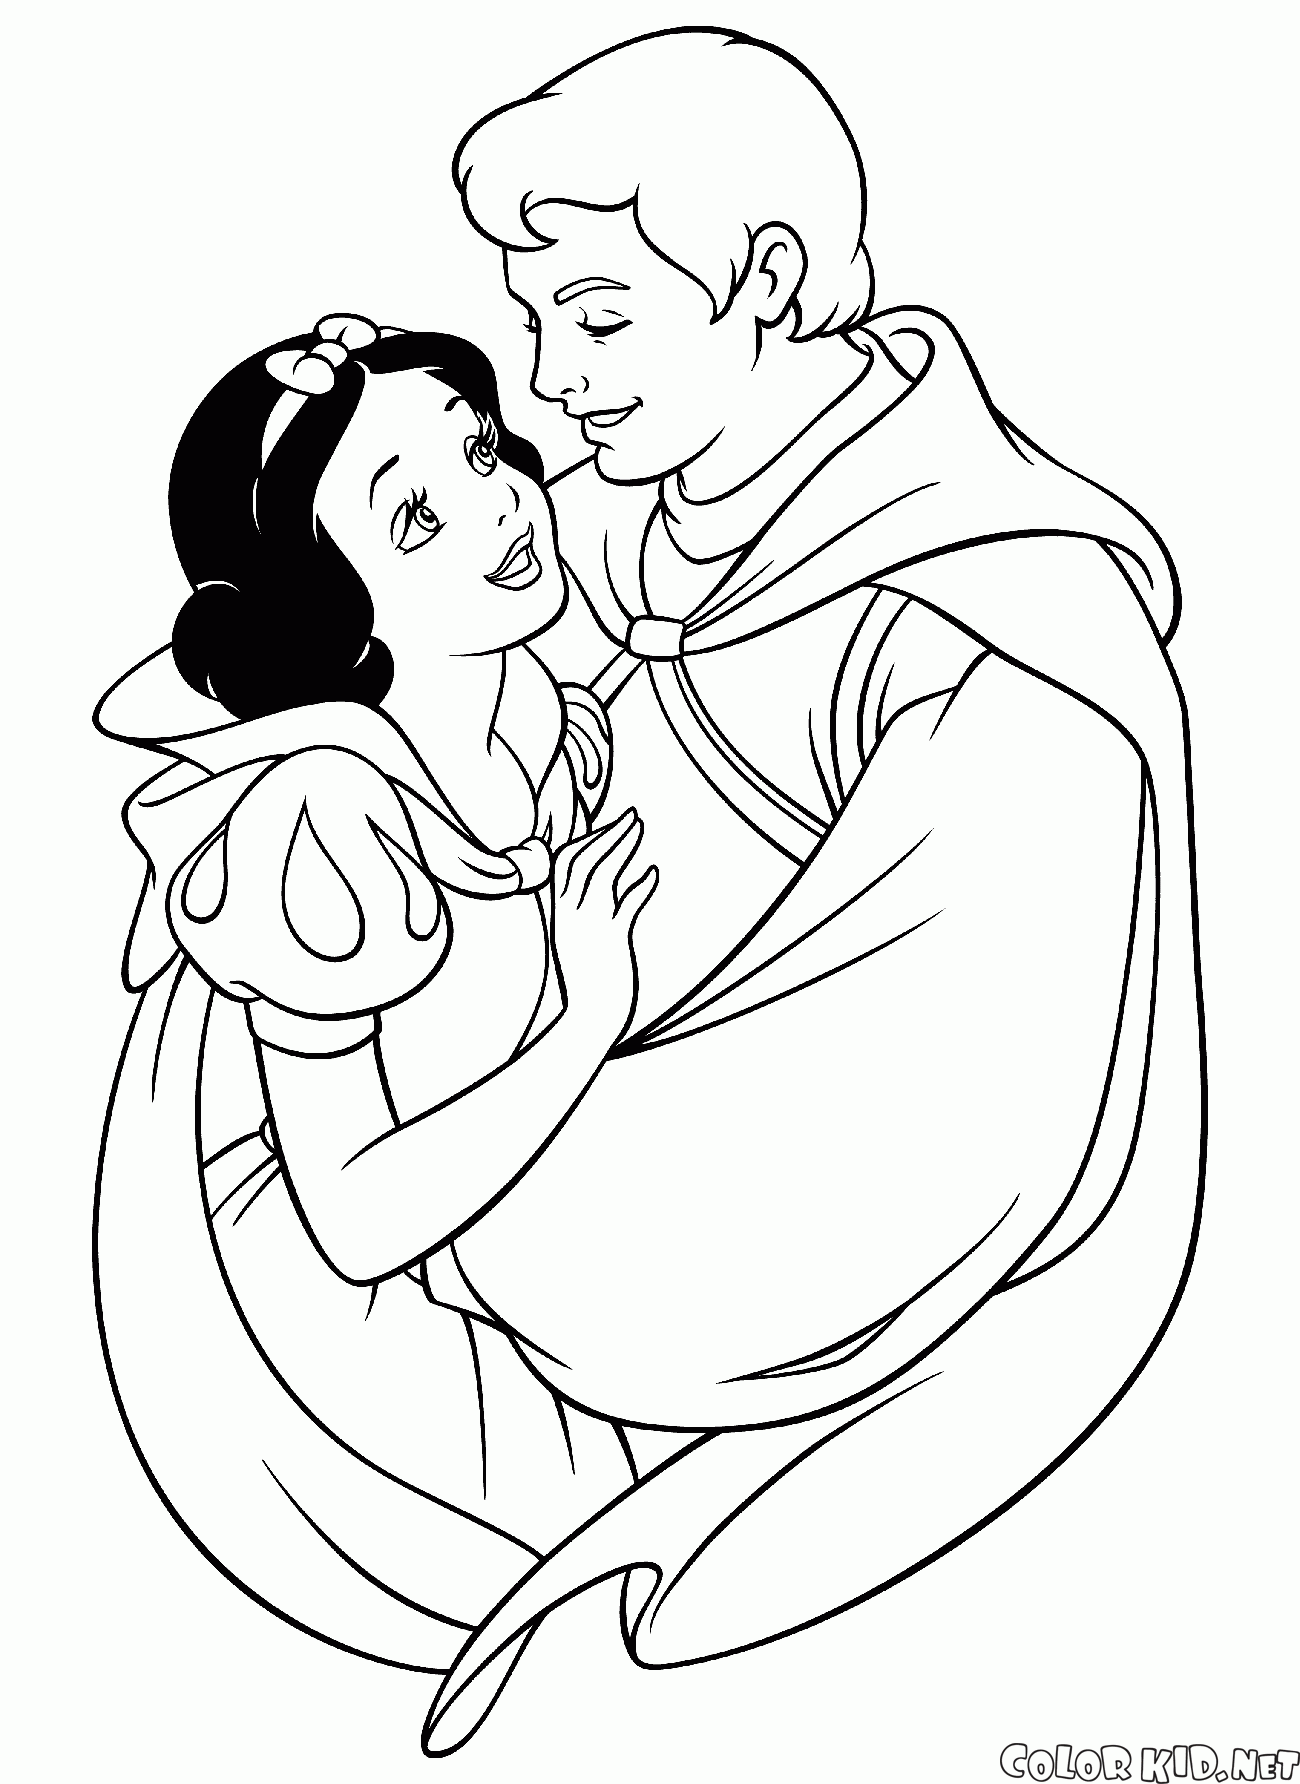 The Prince and the Snow White